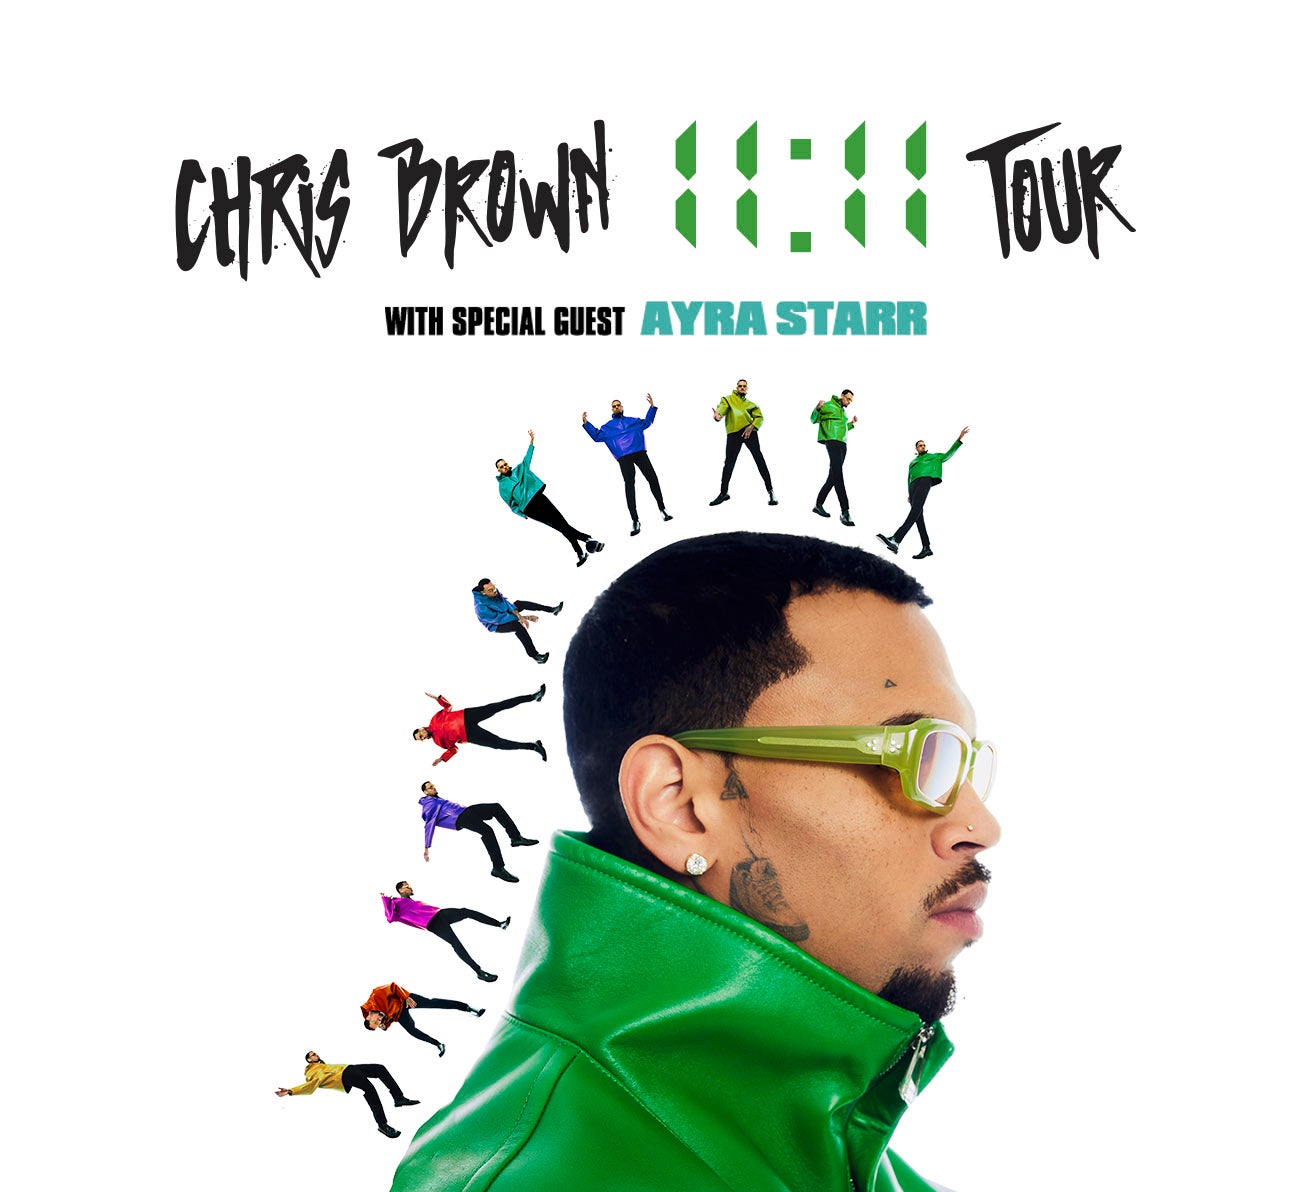 when does chris brown uk tour tickets go on sale